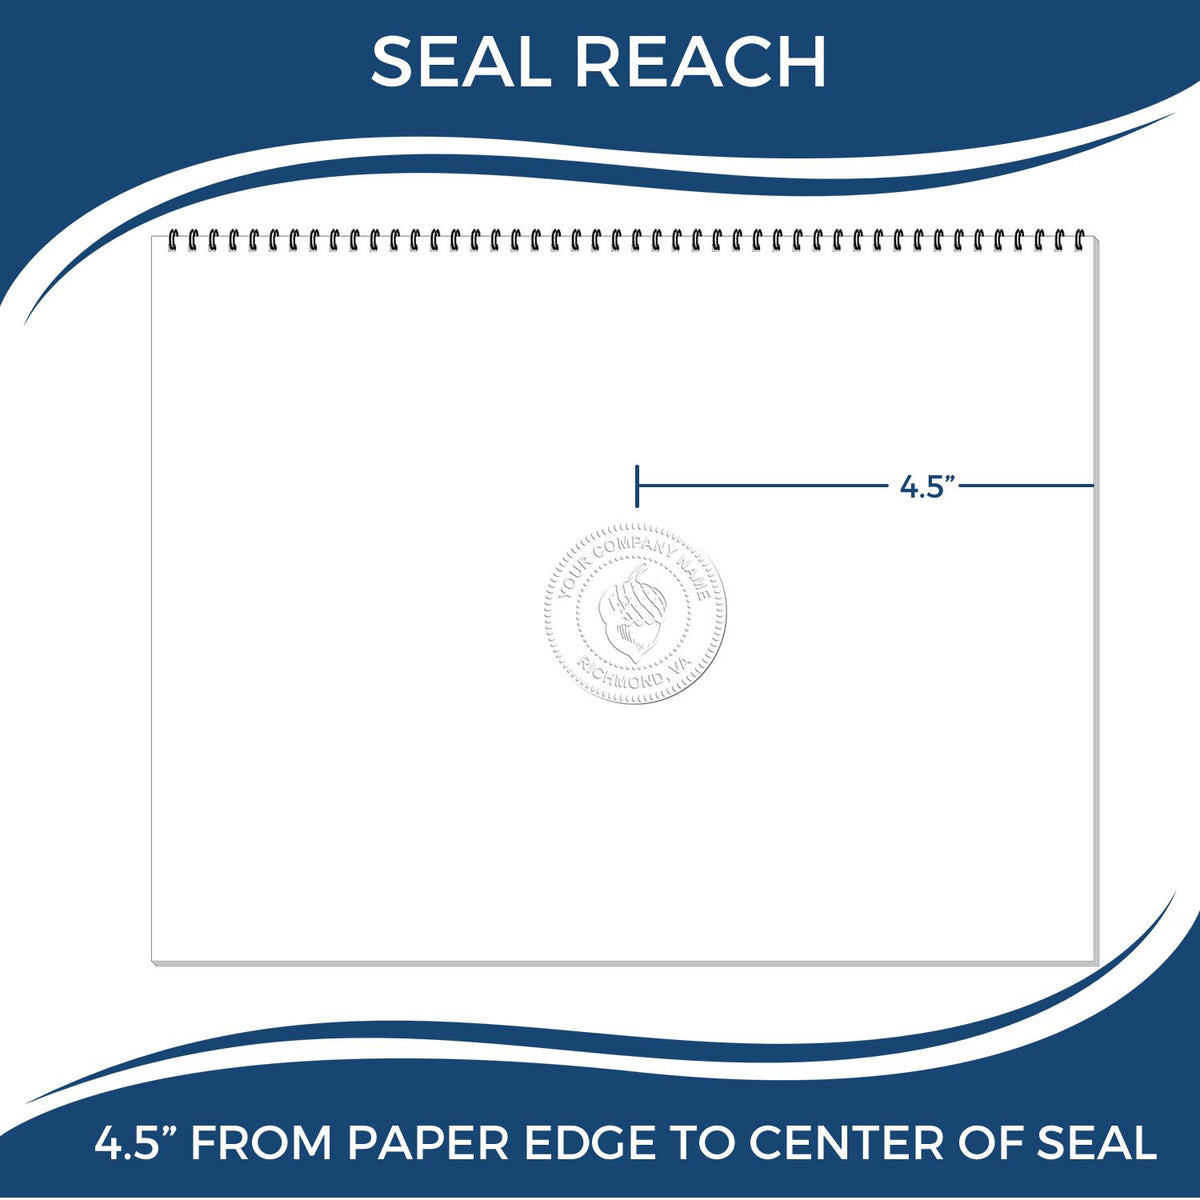 An infographic showing the seal reach which is represented by a ruler and a miniature seal image of the State of Tennessee Extended Long Reach Geologist Seal